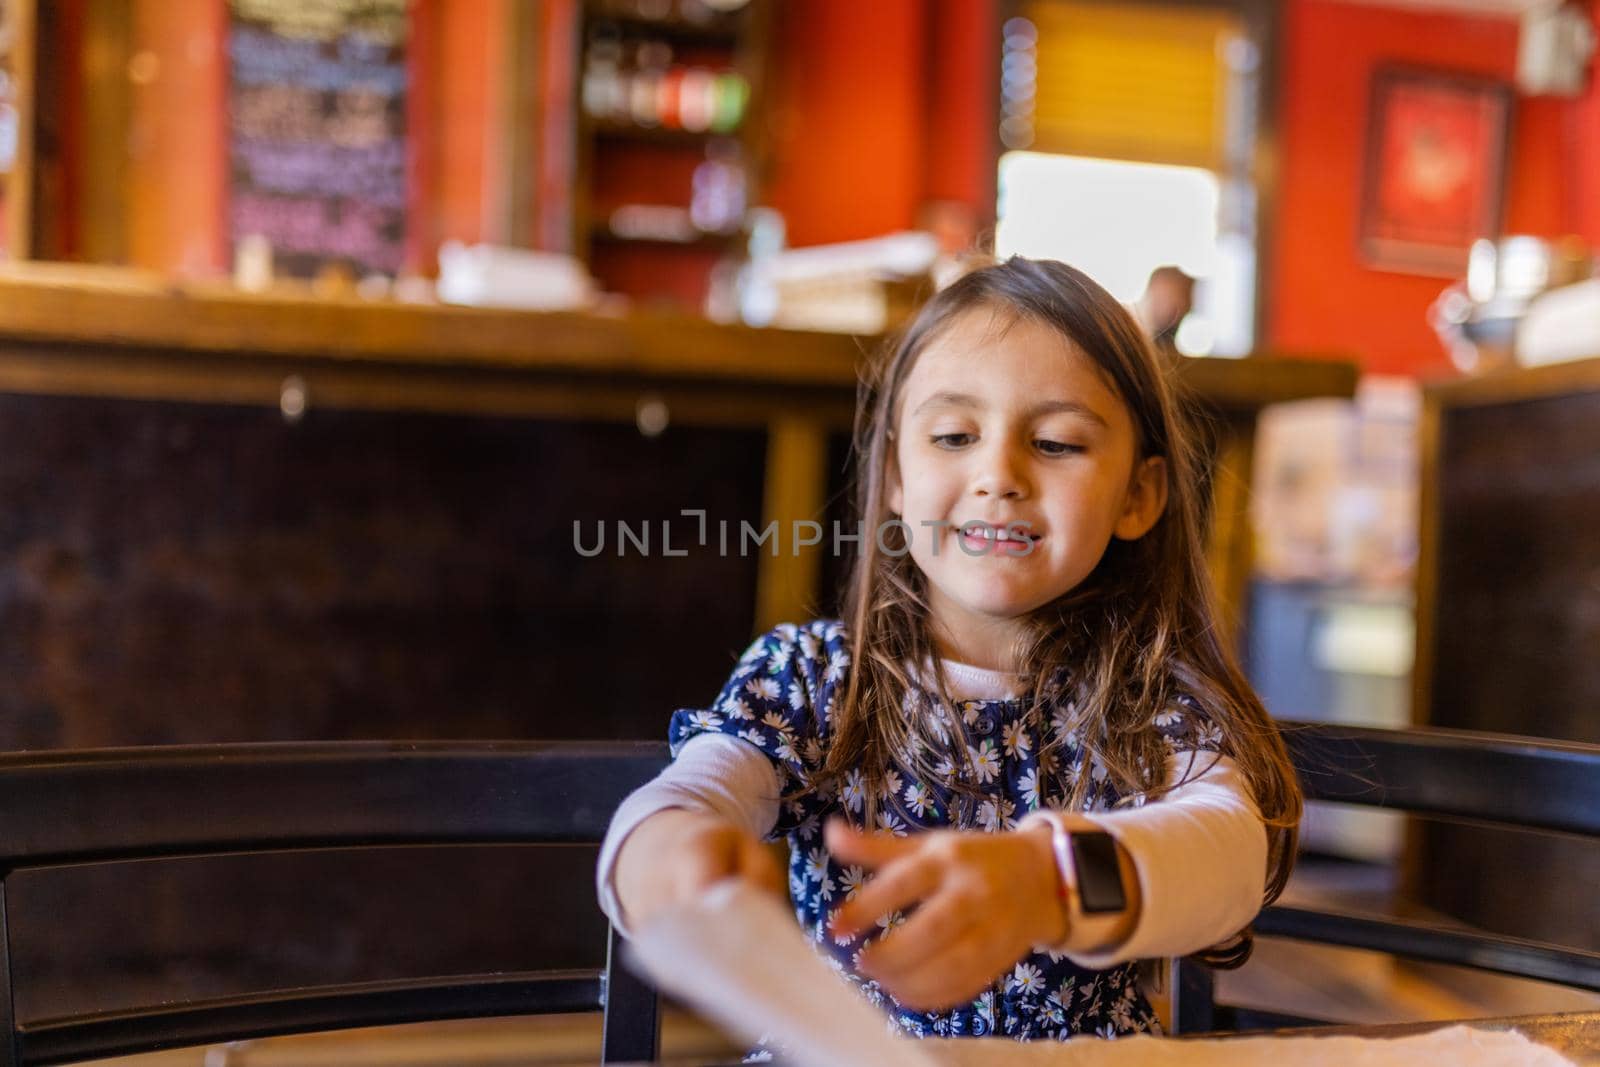 Adorable view of curious little girl in flowered dress adorably holding white napkin in restaurant. Cute young child sitting at a table playing with blurry background. Kids interacting with food